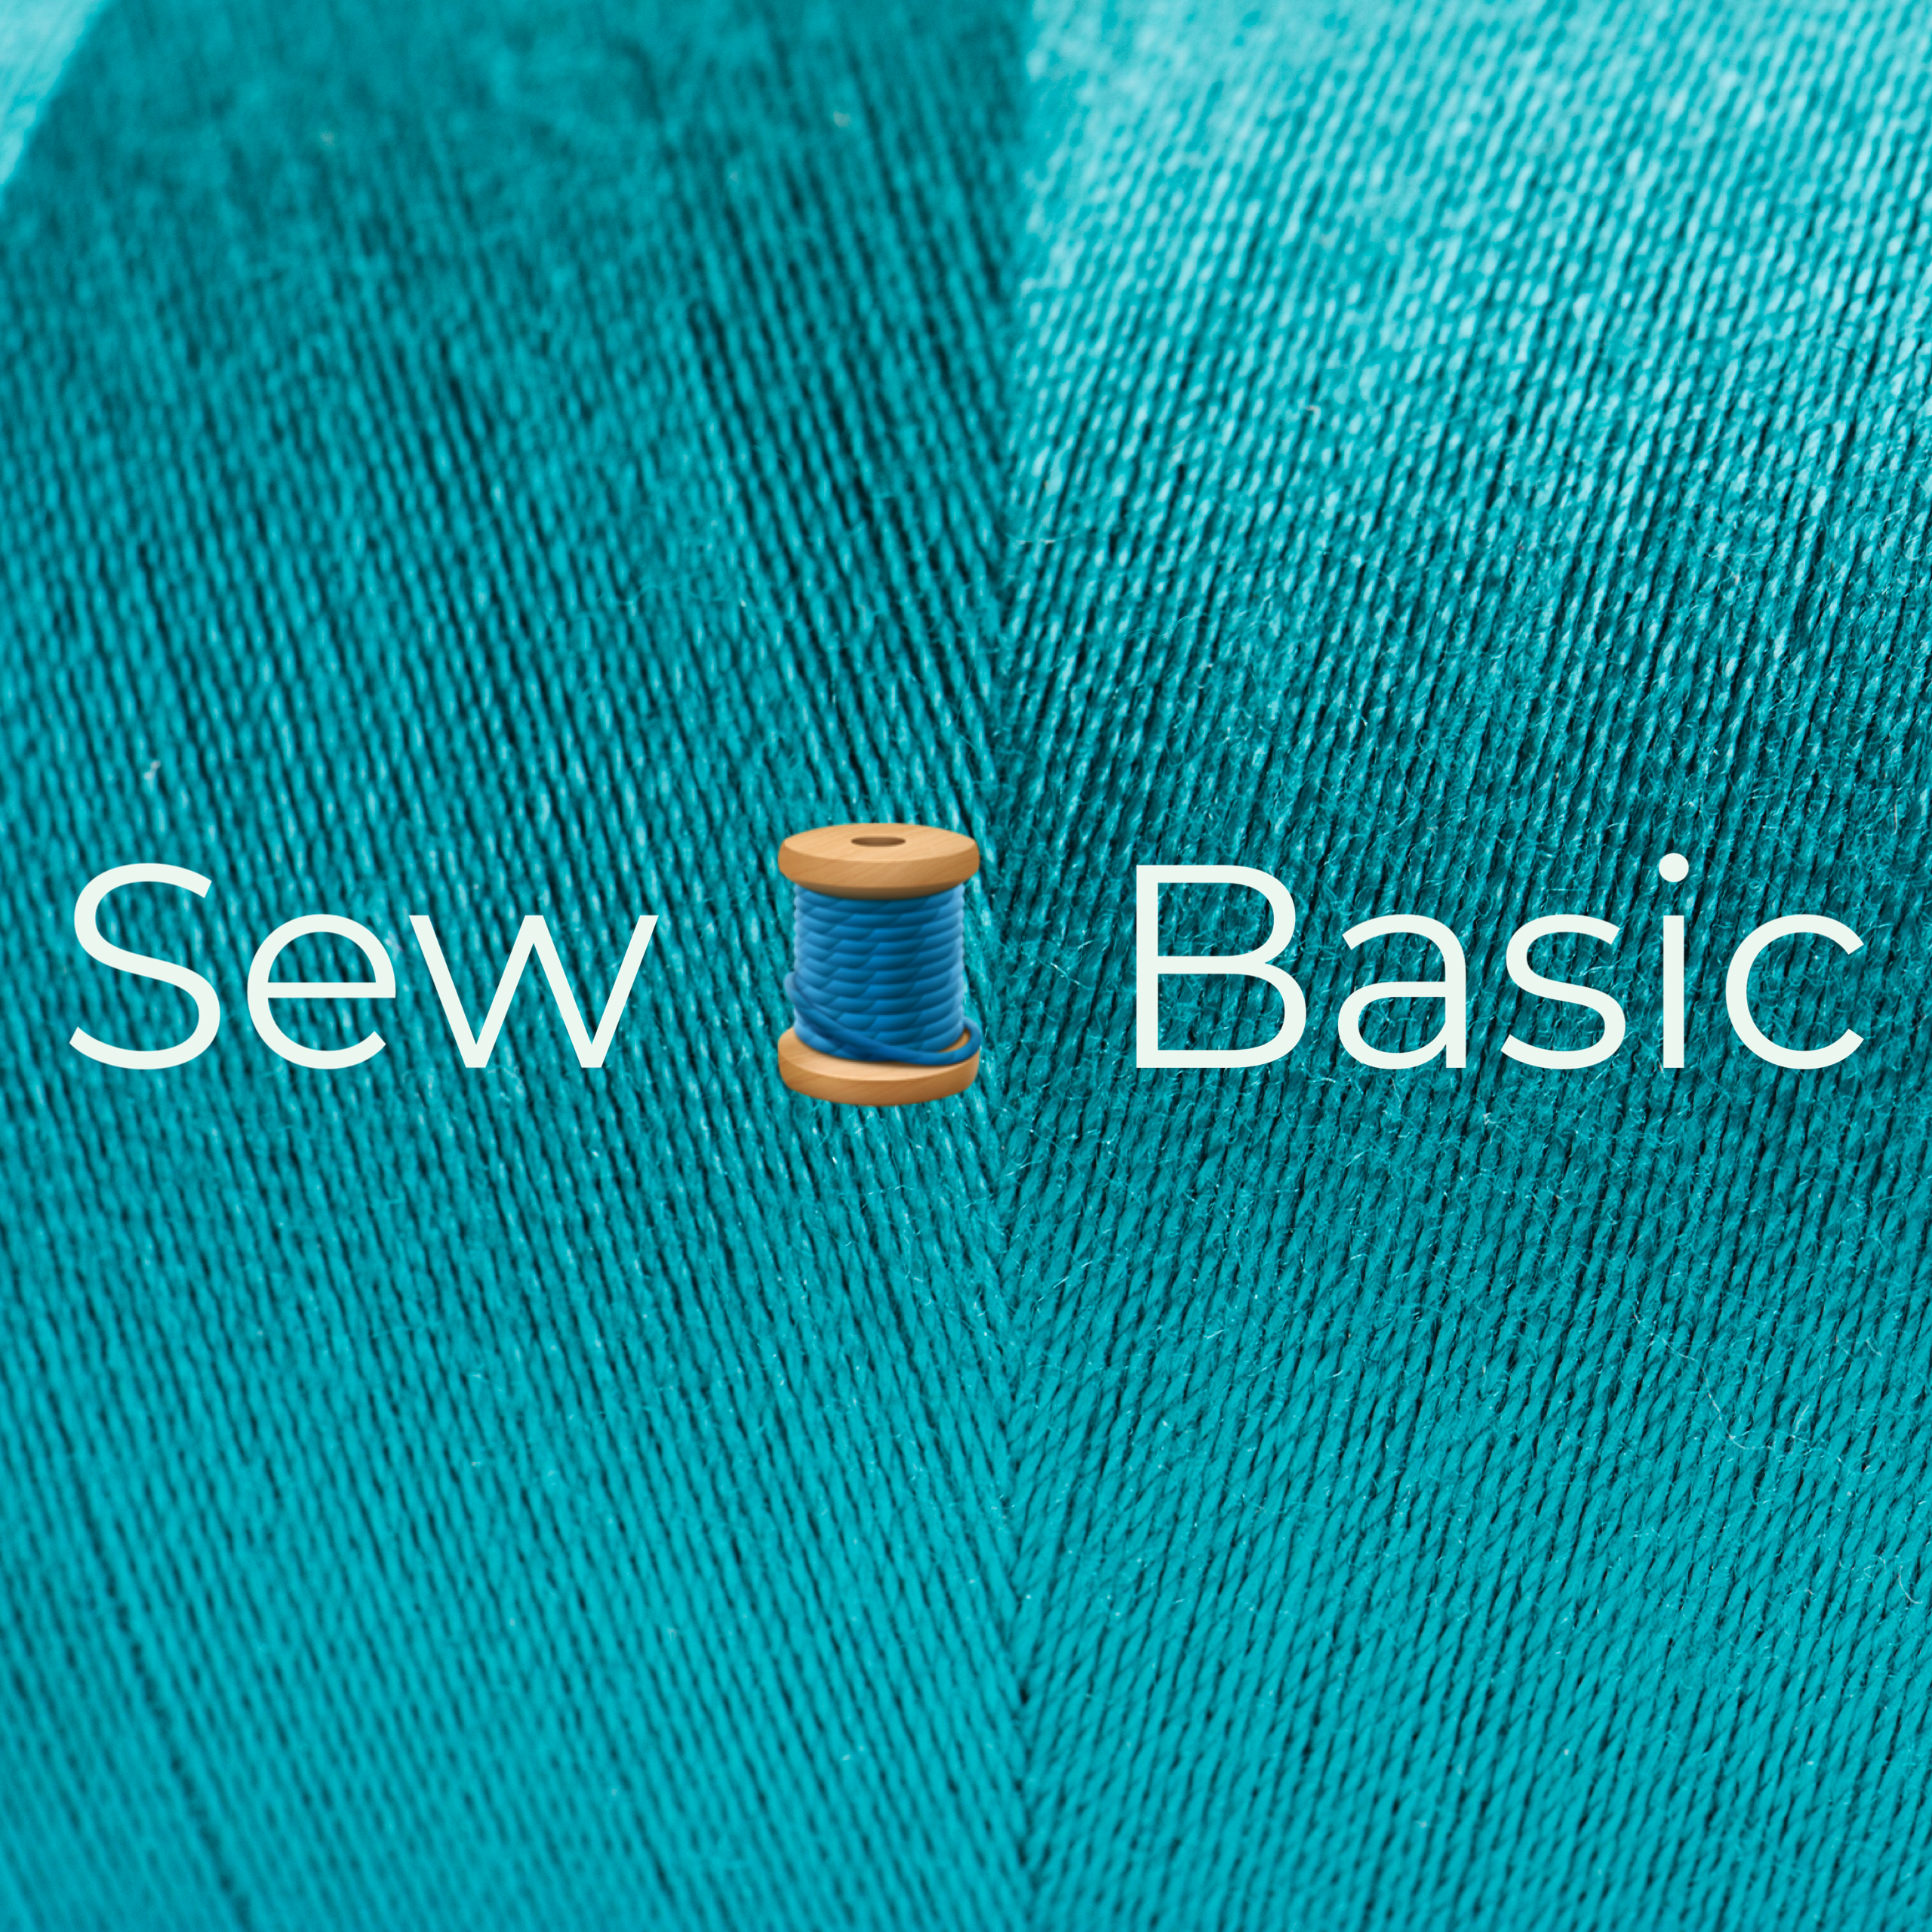 Sew Basic Sewing Class